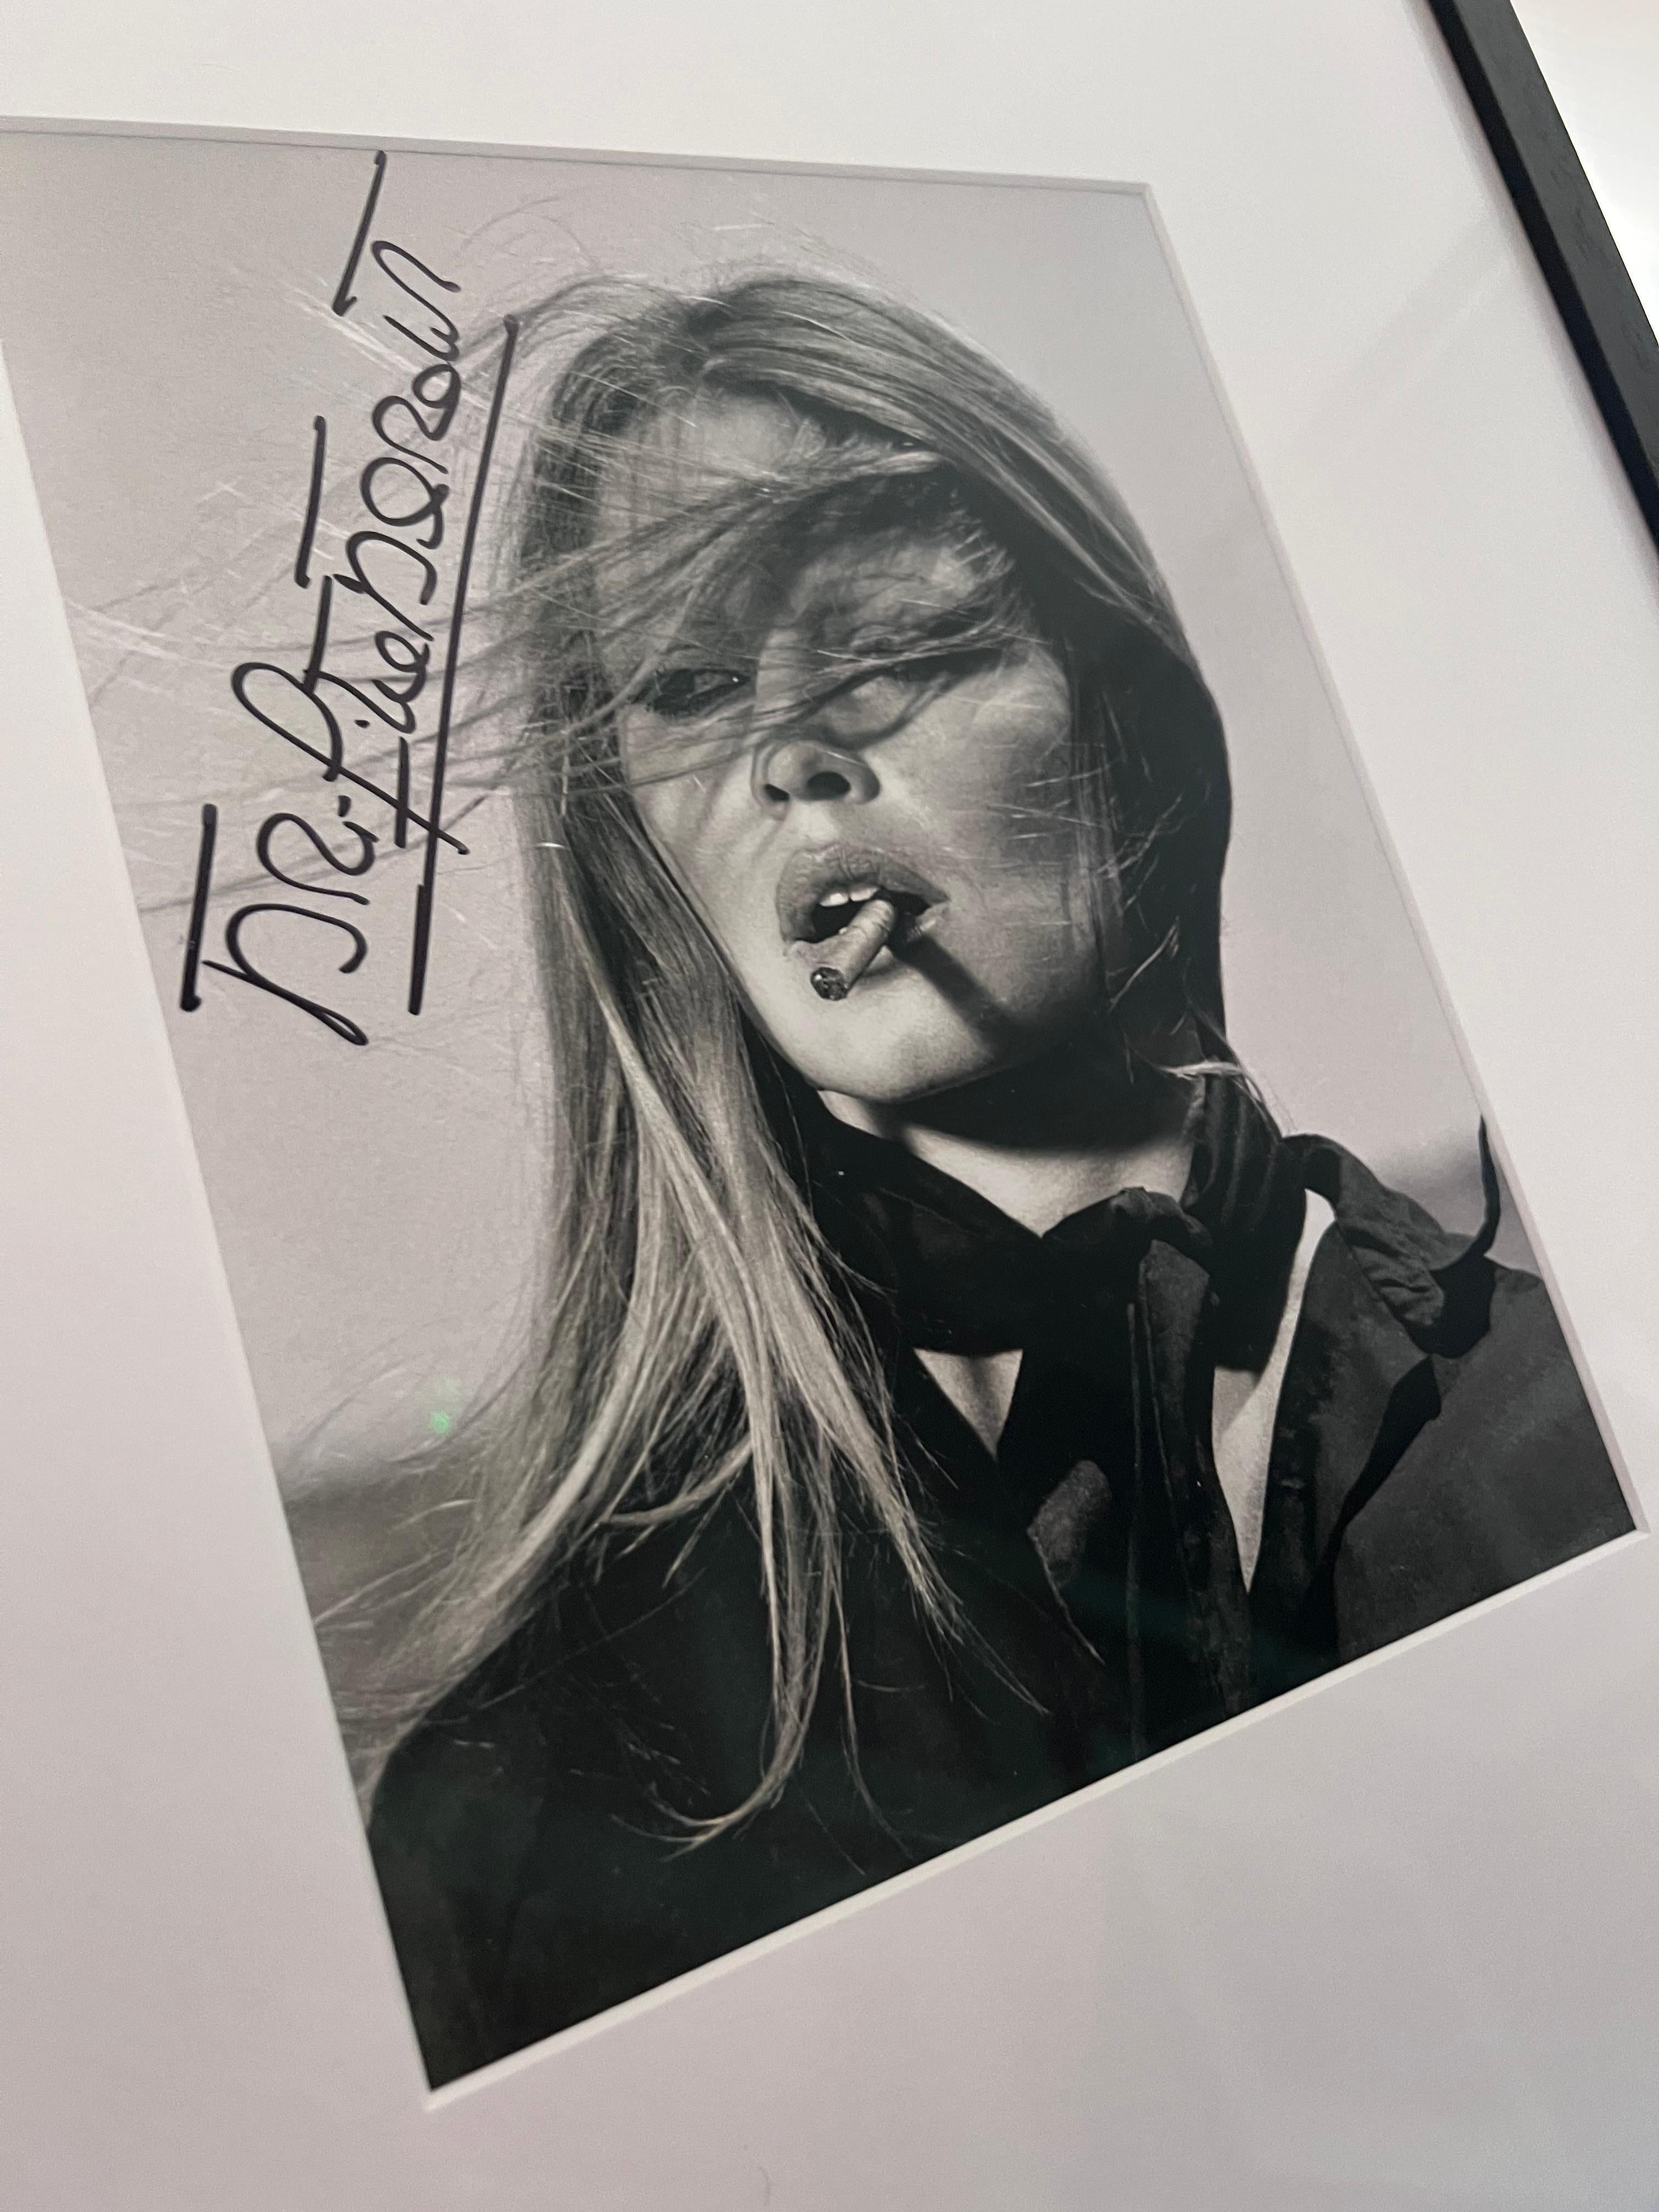 Brigitte Bardot With Cigar In Mexico - hand signed by Brigitte Bardot framed  - Photograph by Terry O'Neill